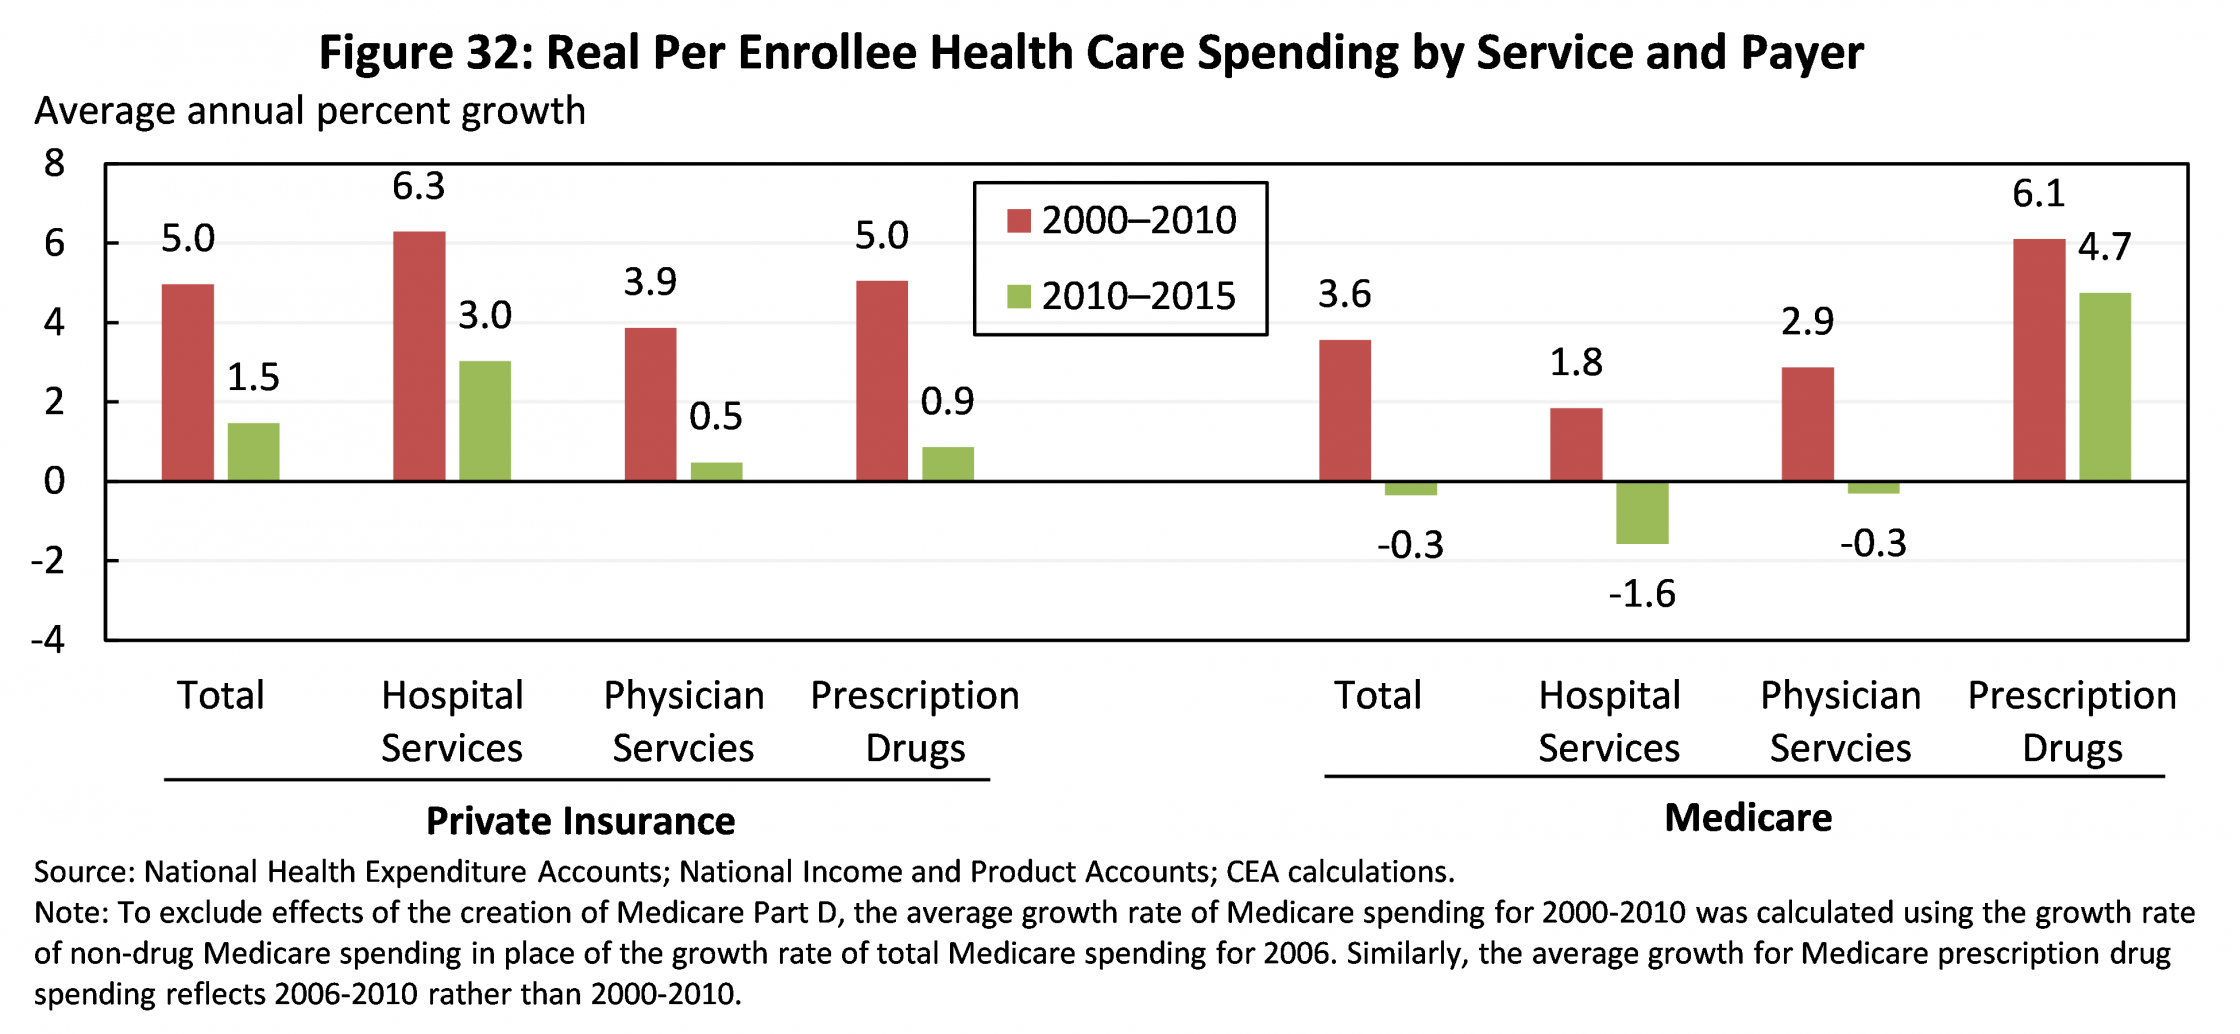 Real Per Enrollee Health Care Spending by Service and Payer